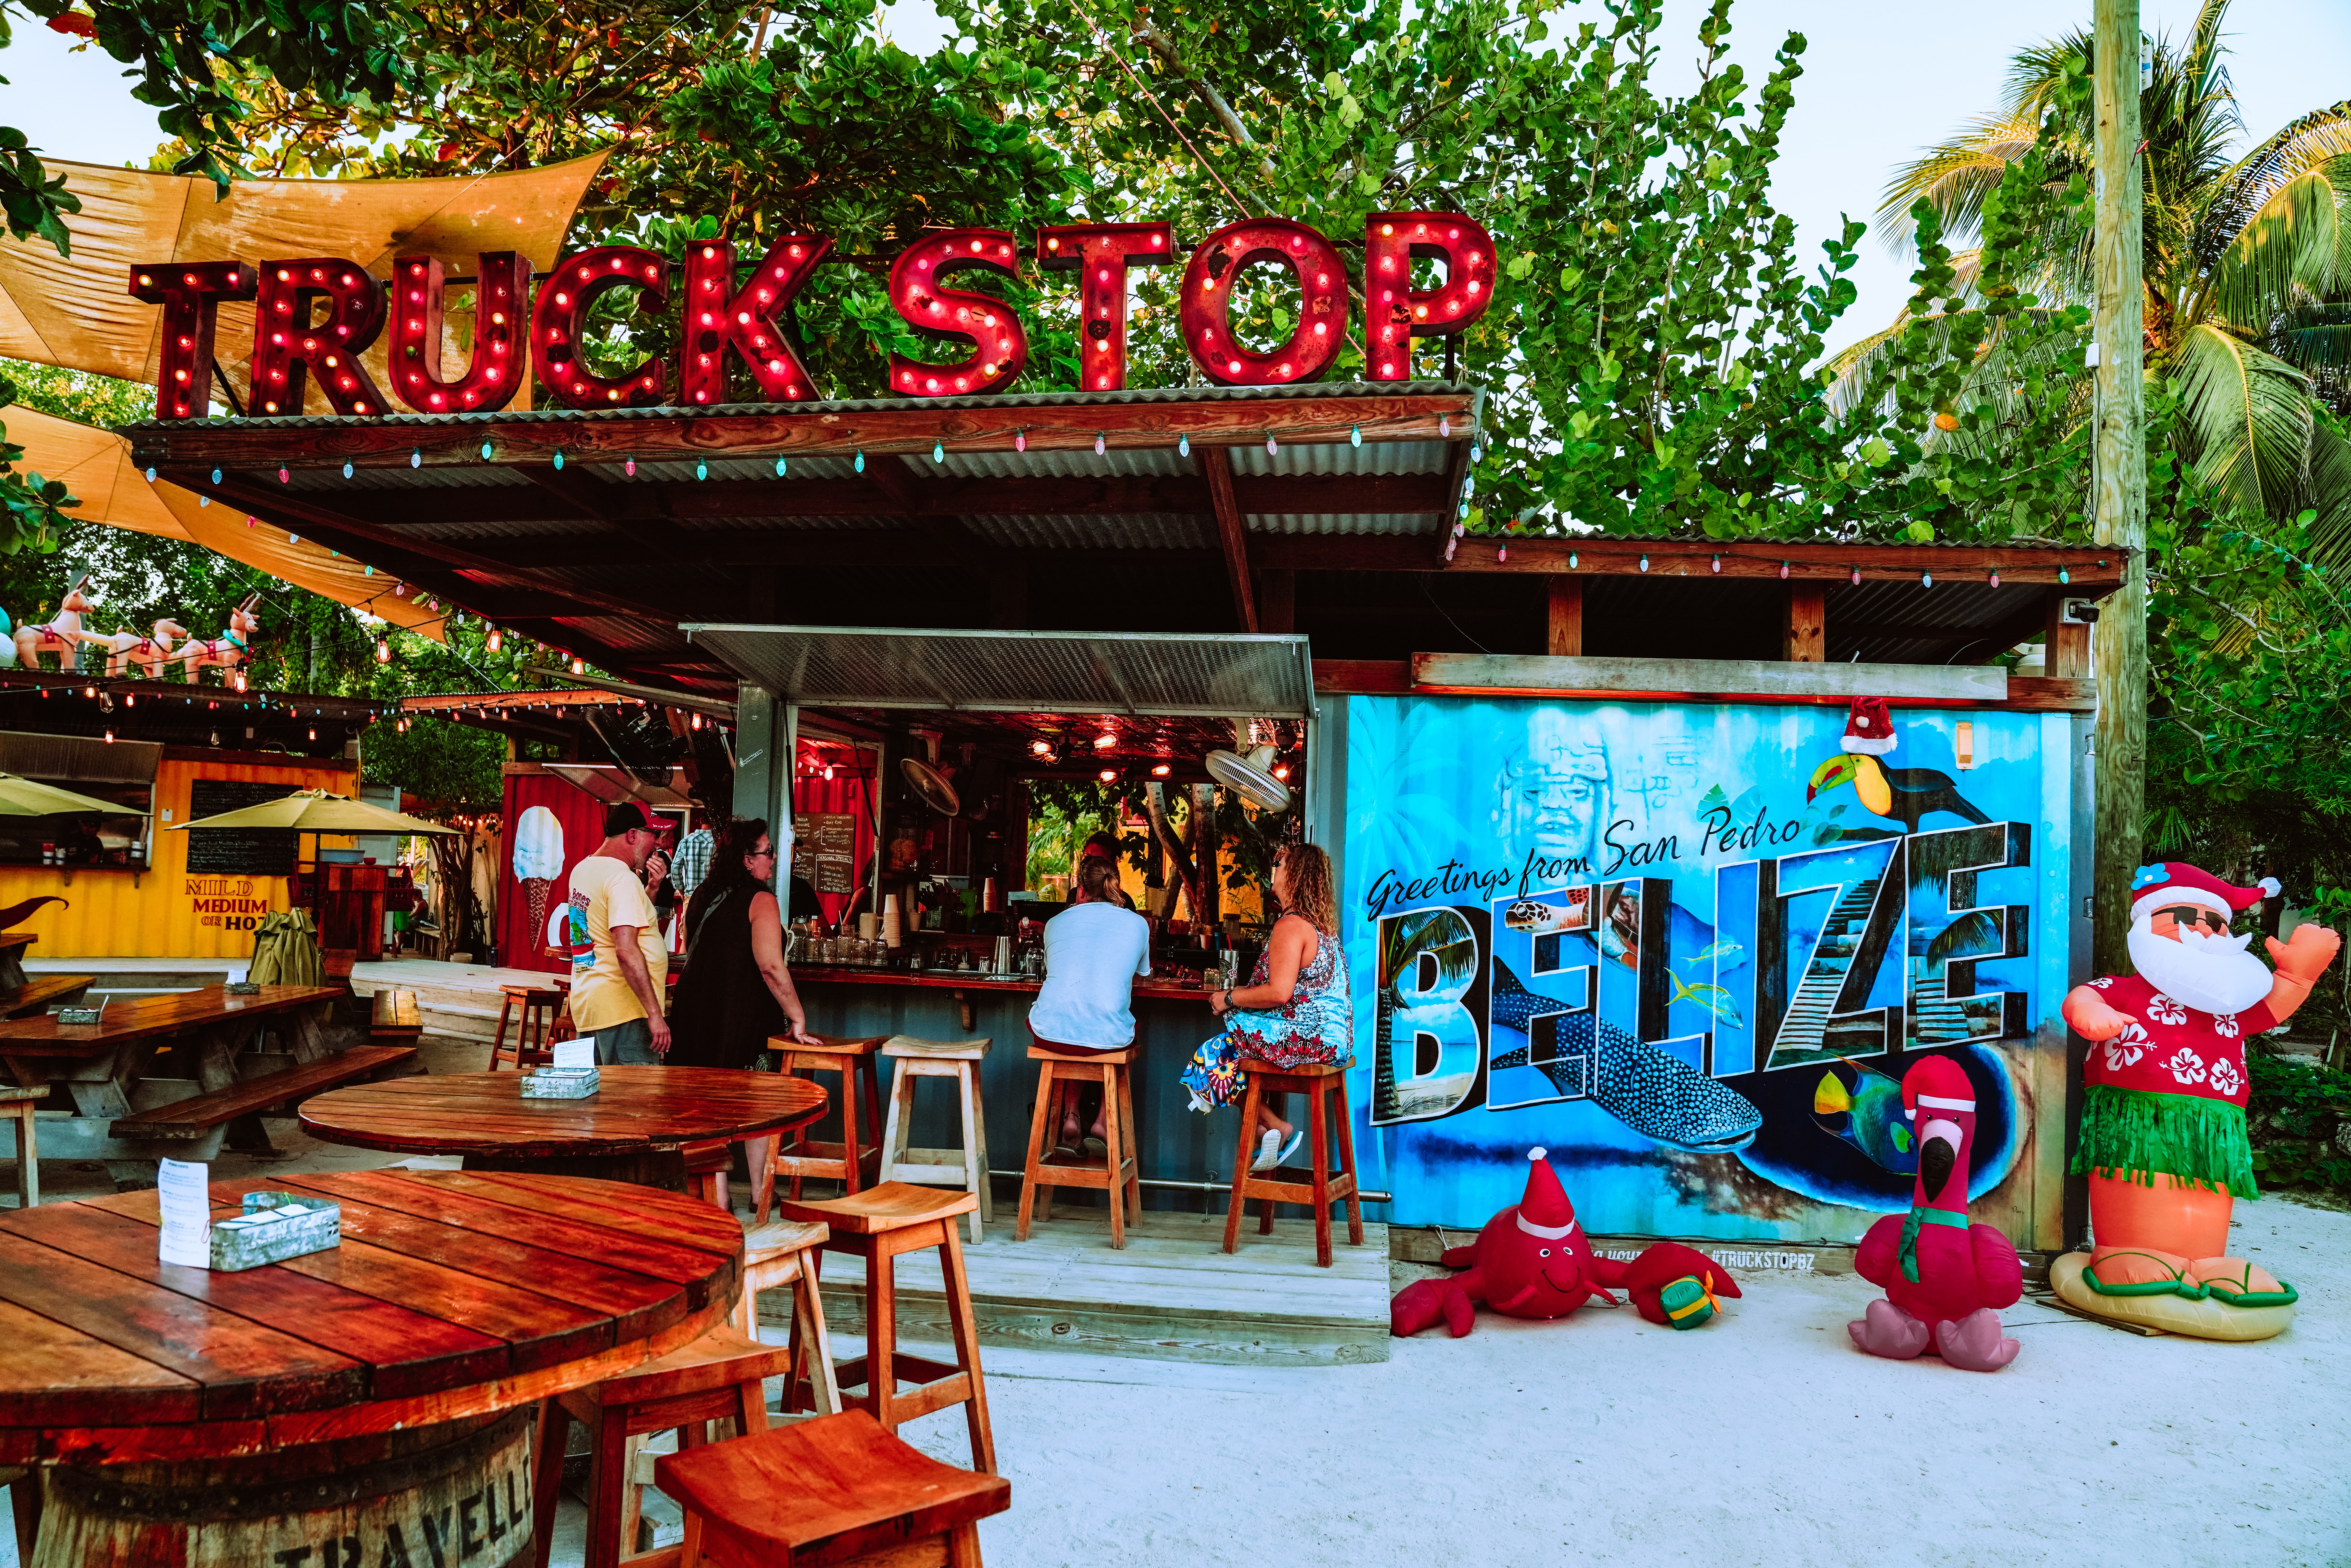 Island-infused tropical-looking truck stop